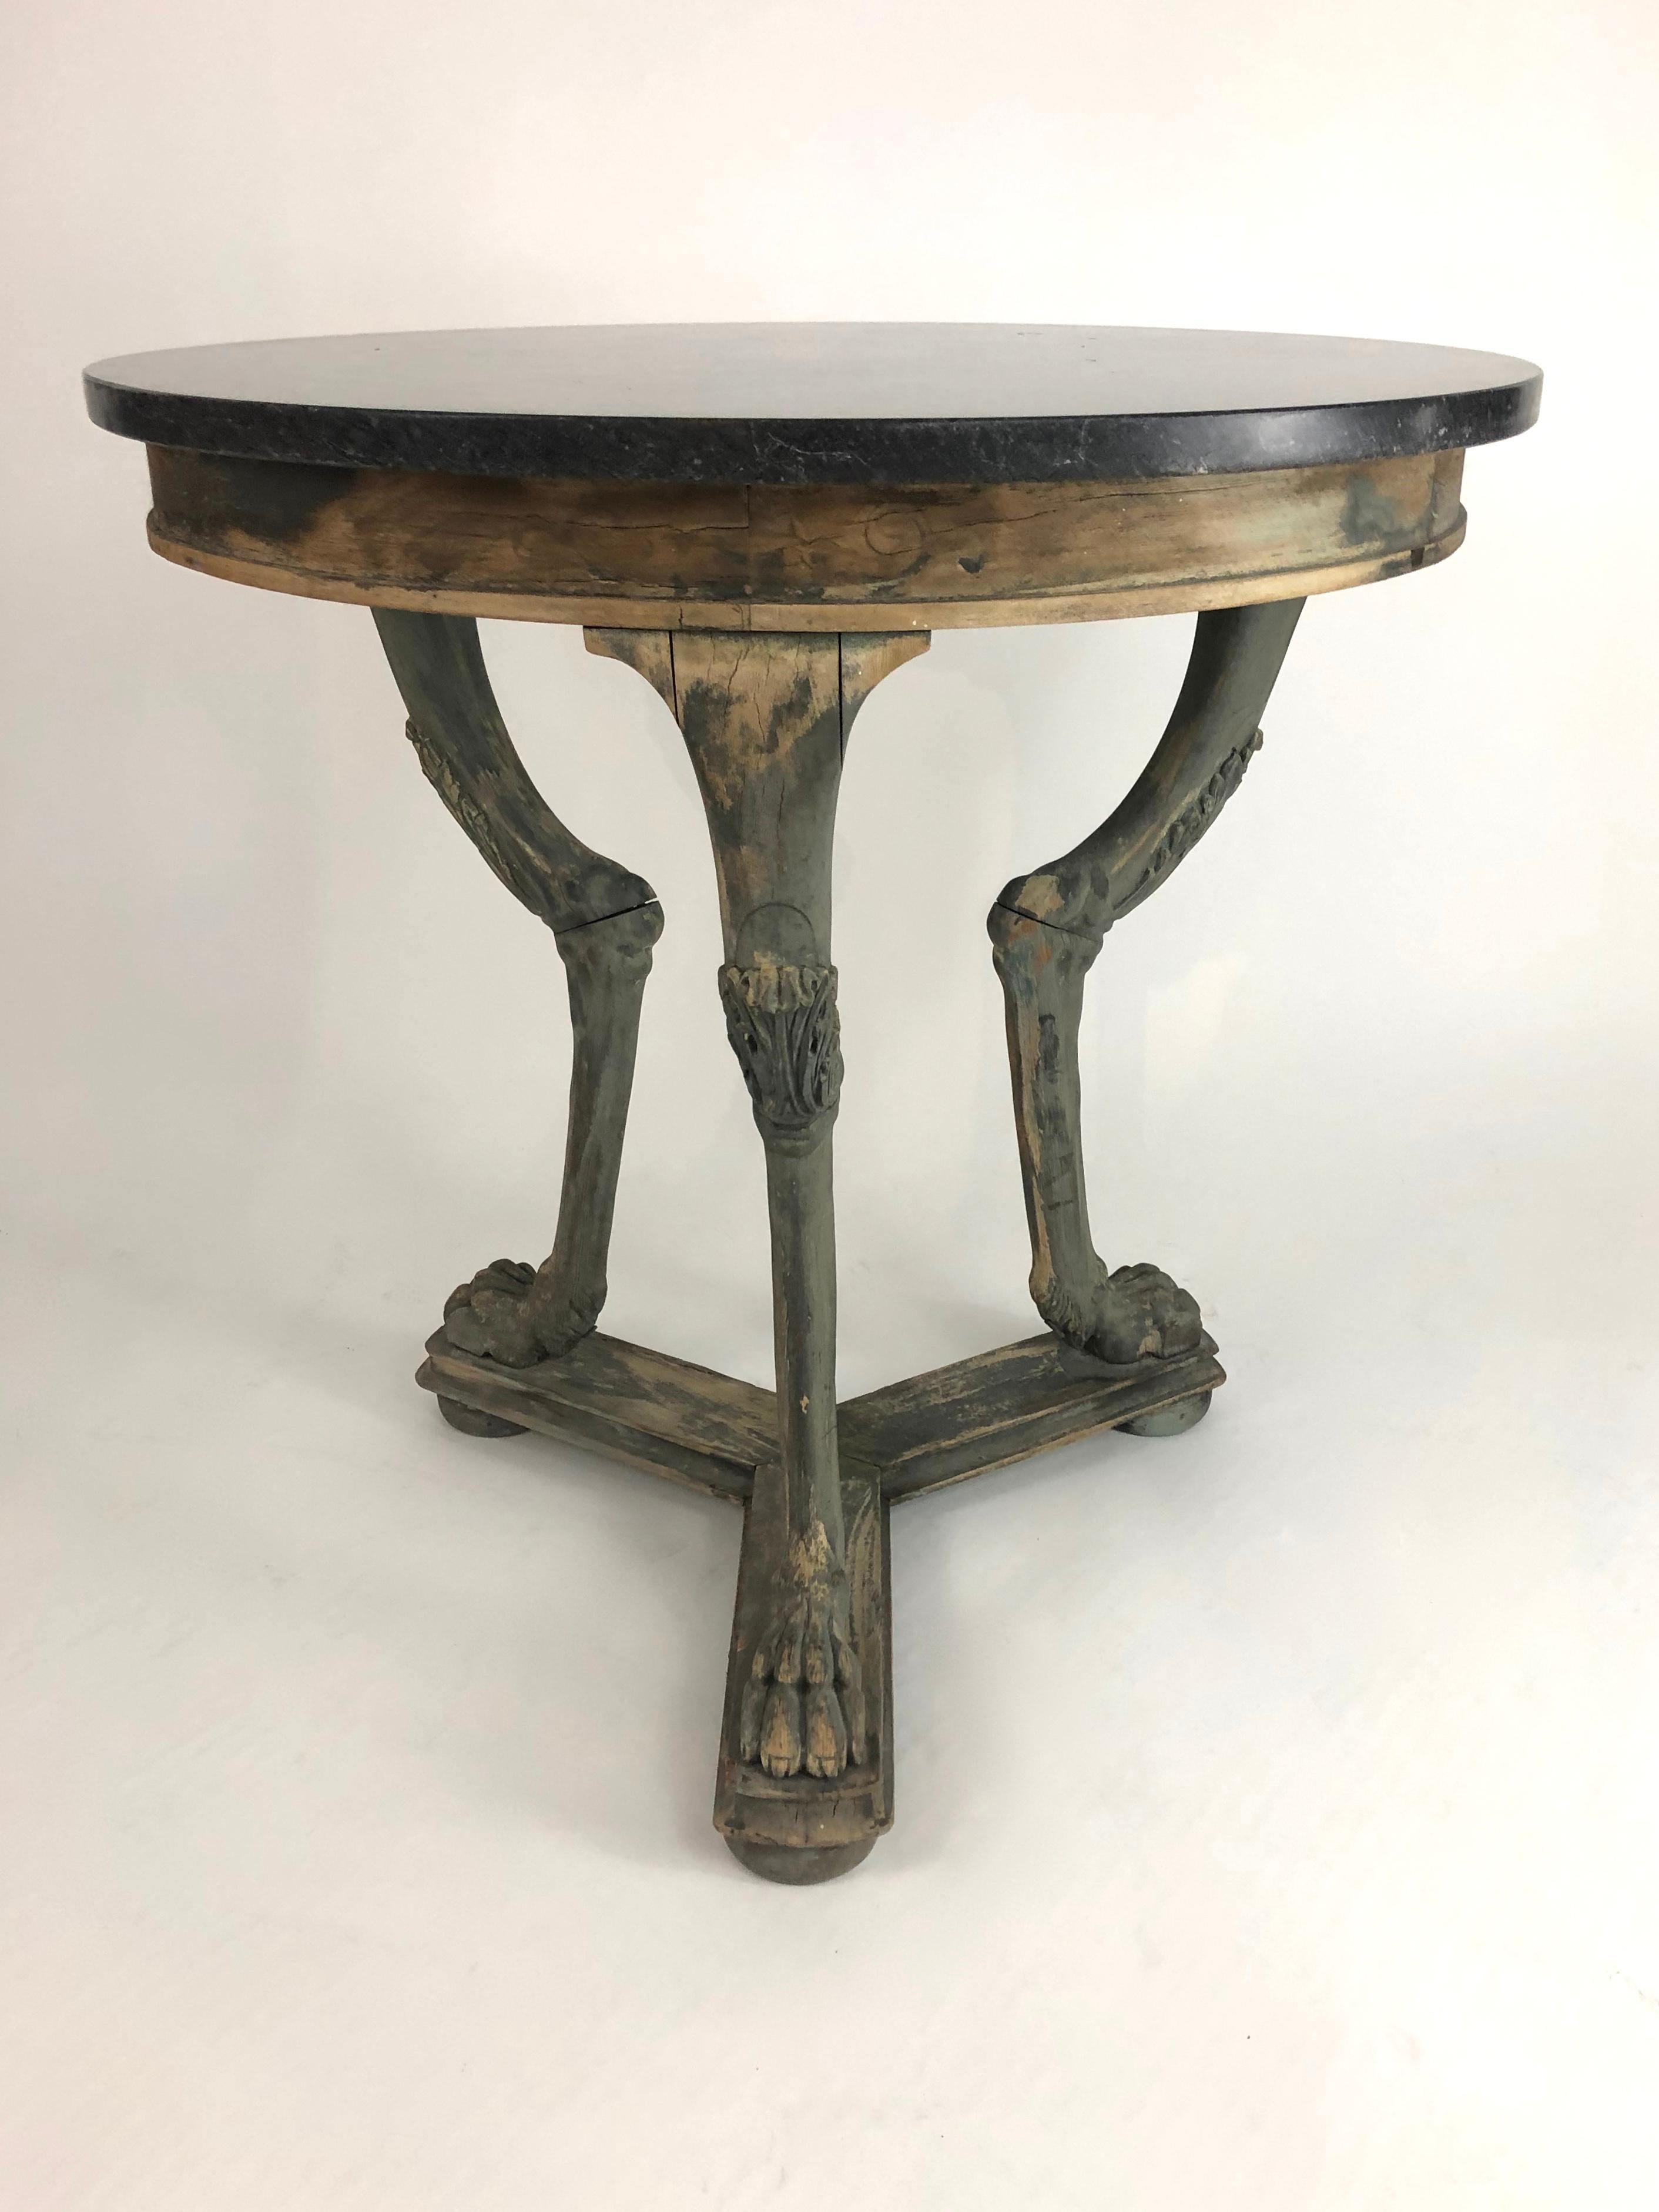 A neoclassical gueridon side table with charcoal grey marble top supported by a carved wood tripod base with acanthus leaf carved legs and animal paw feet joined by a three way plinth raised on bun feet, in well worn old grey painted finish. This